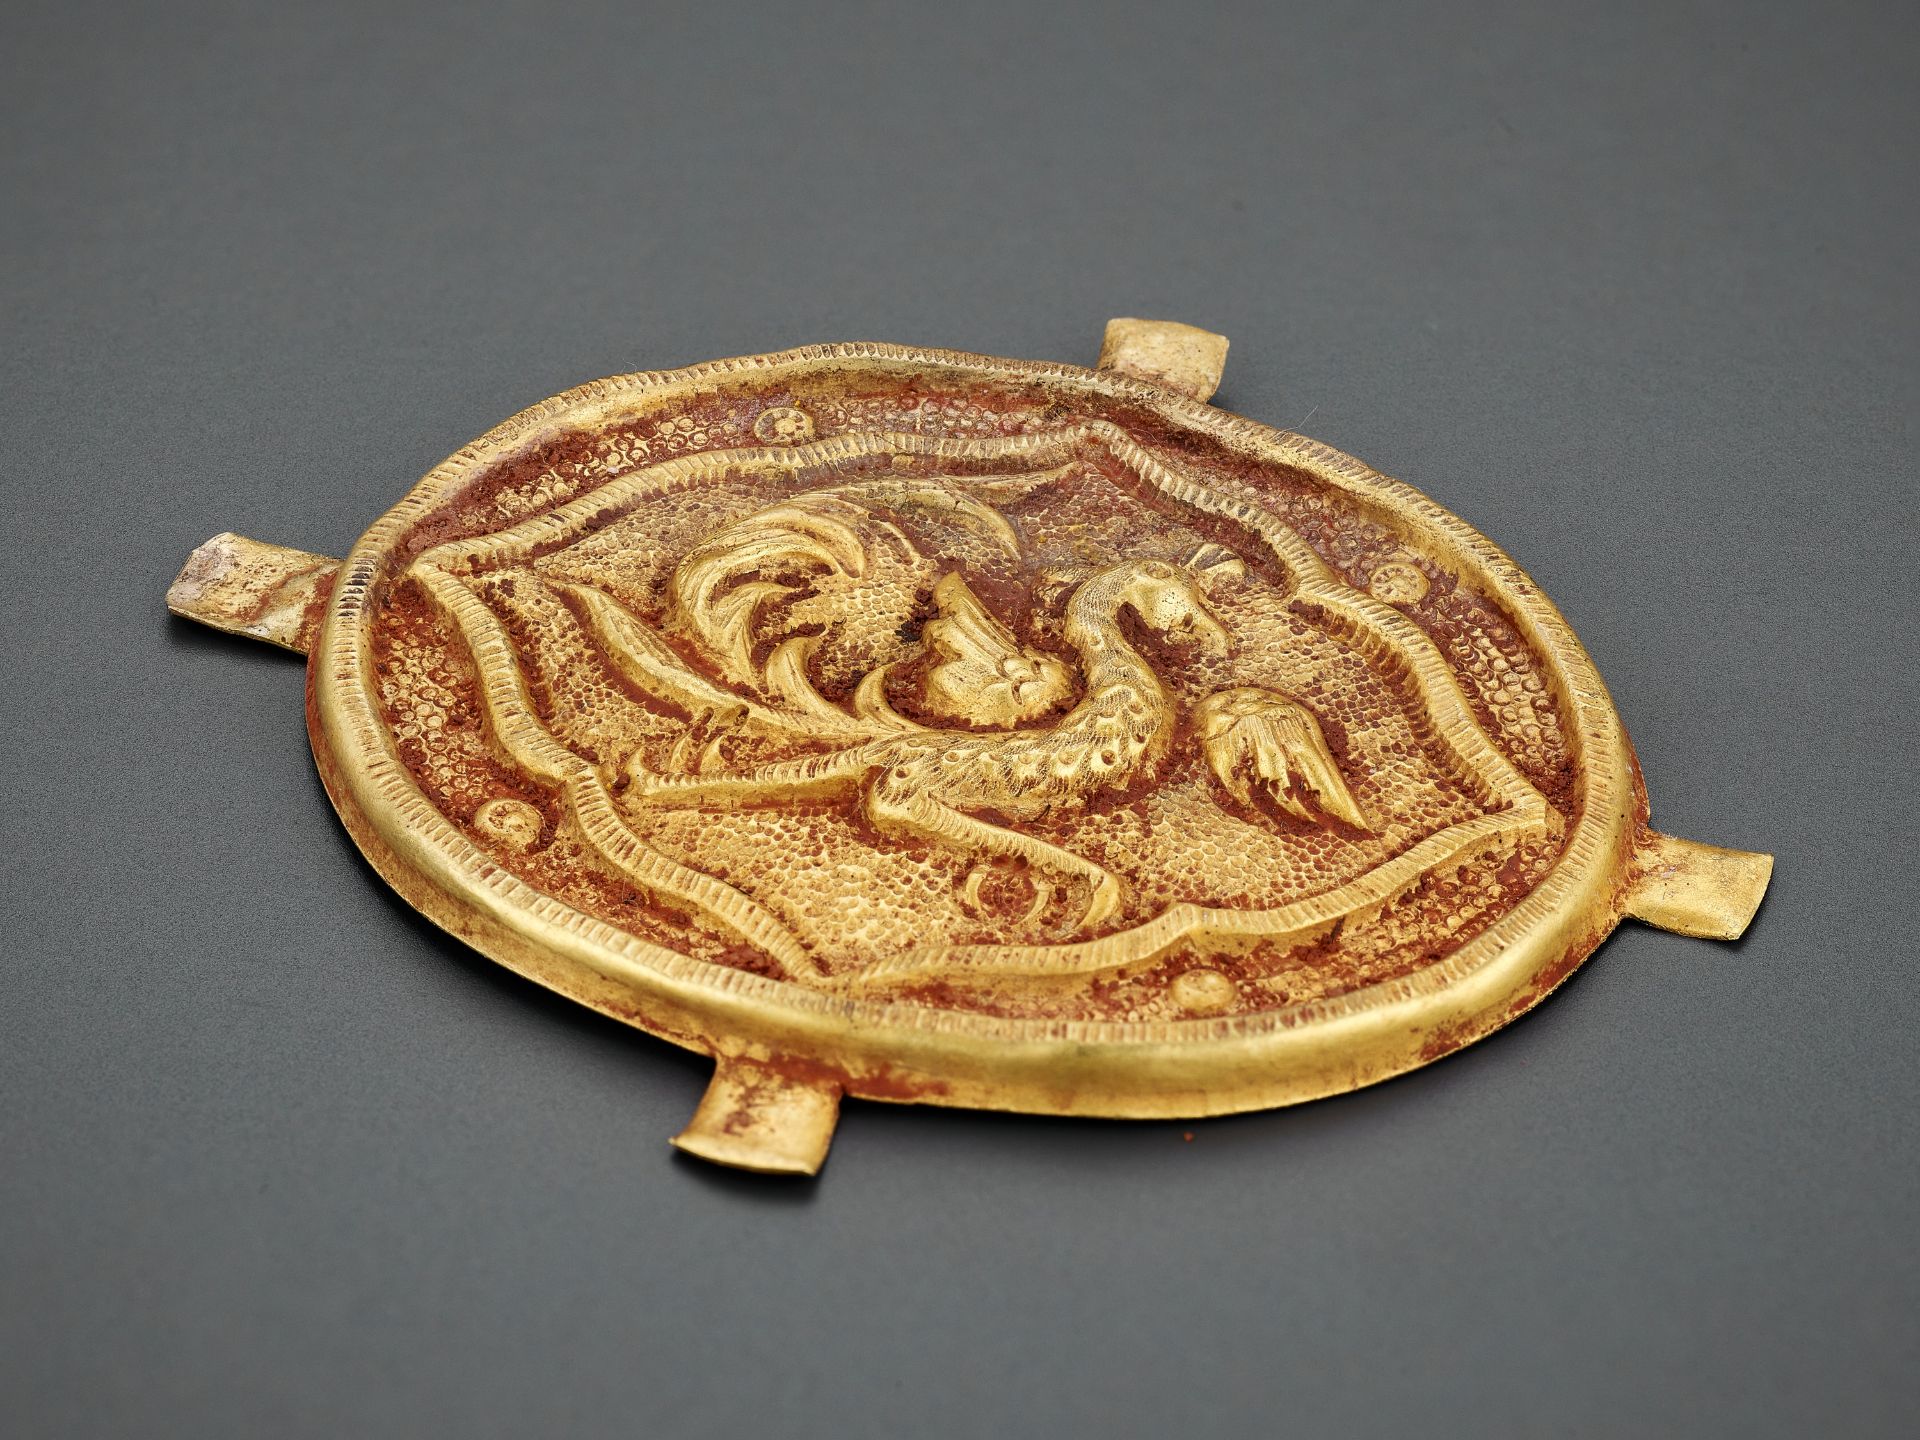 A 13-PART GOLD REPOUSSE BELT, TANG TO LIAO DYNASTY - Image 3 of 7